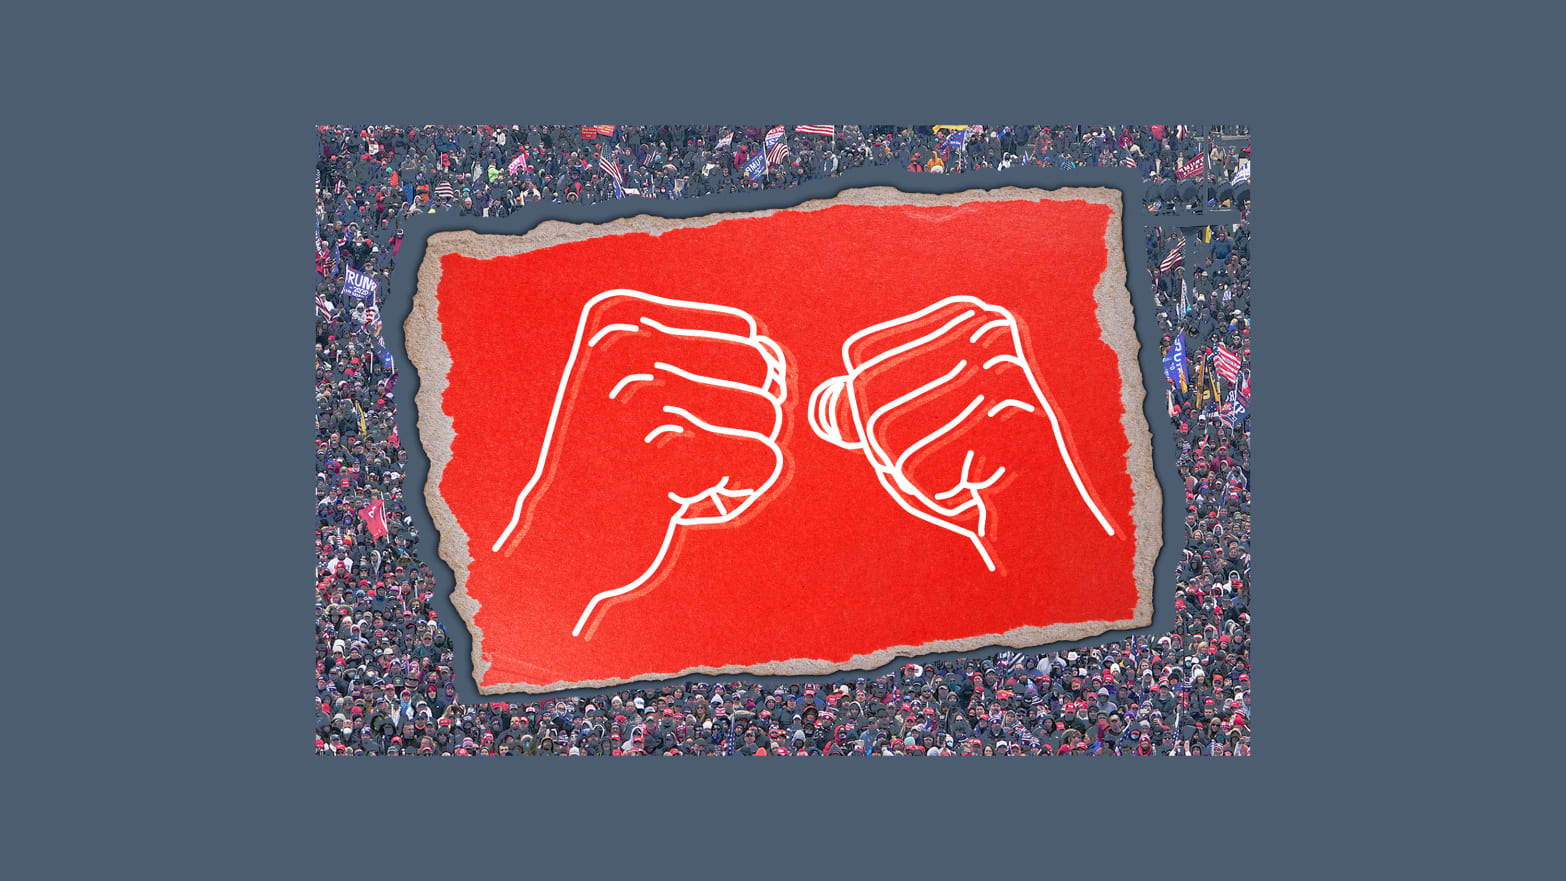 A photo illustration of punching fists and a crowd from Jan. 6 Capitol riot.